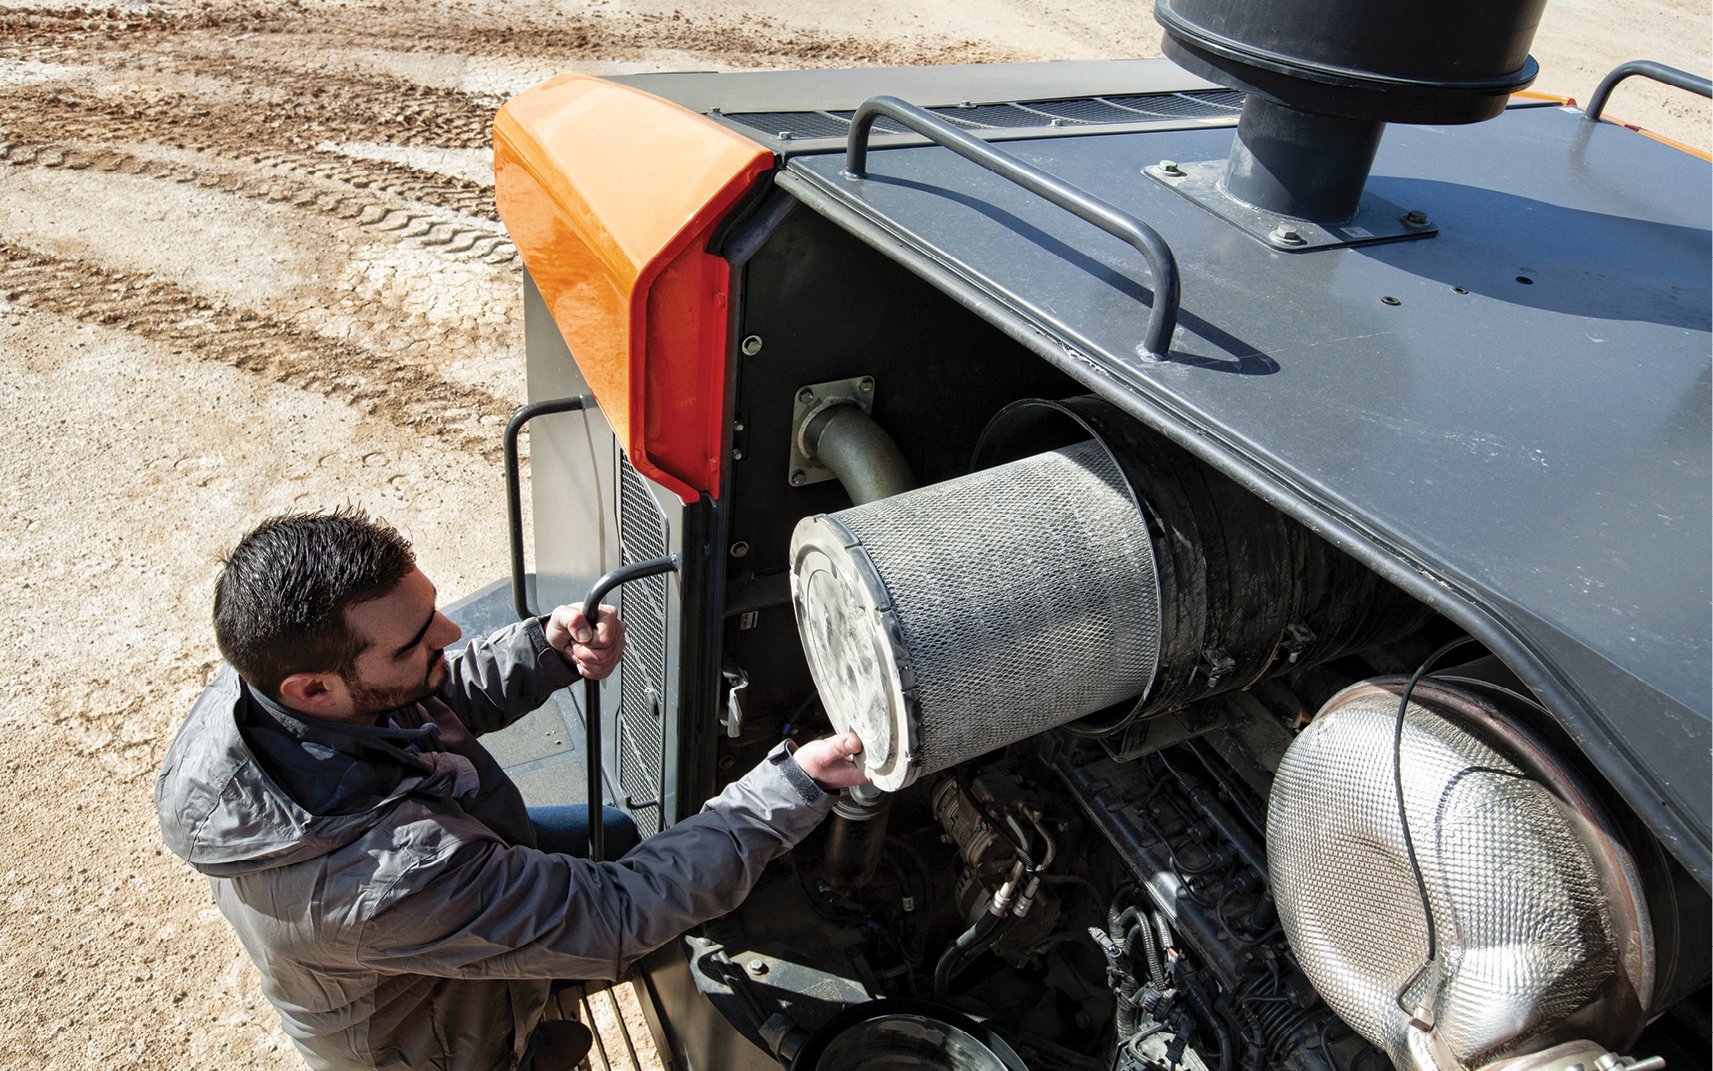 A DEVELON employee replaces an air filter in a crawler excavator.